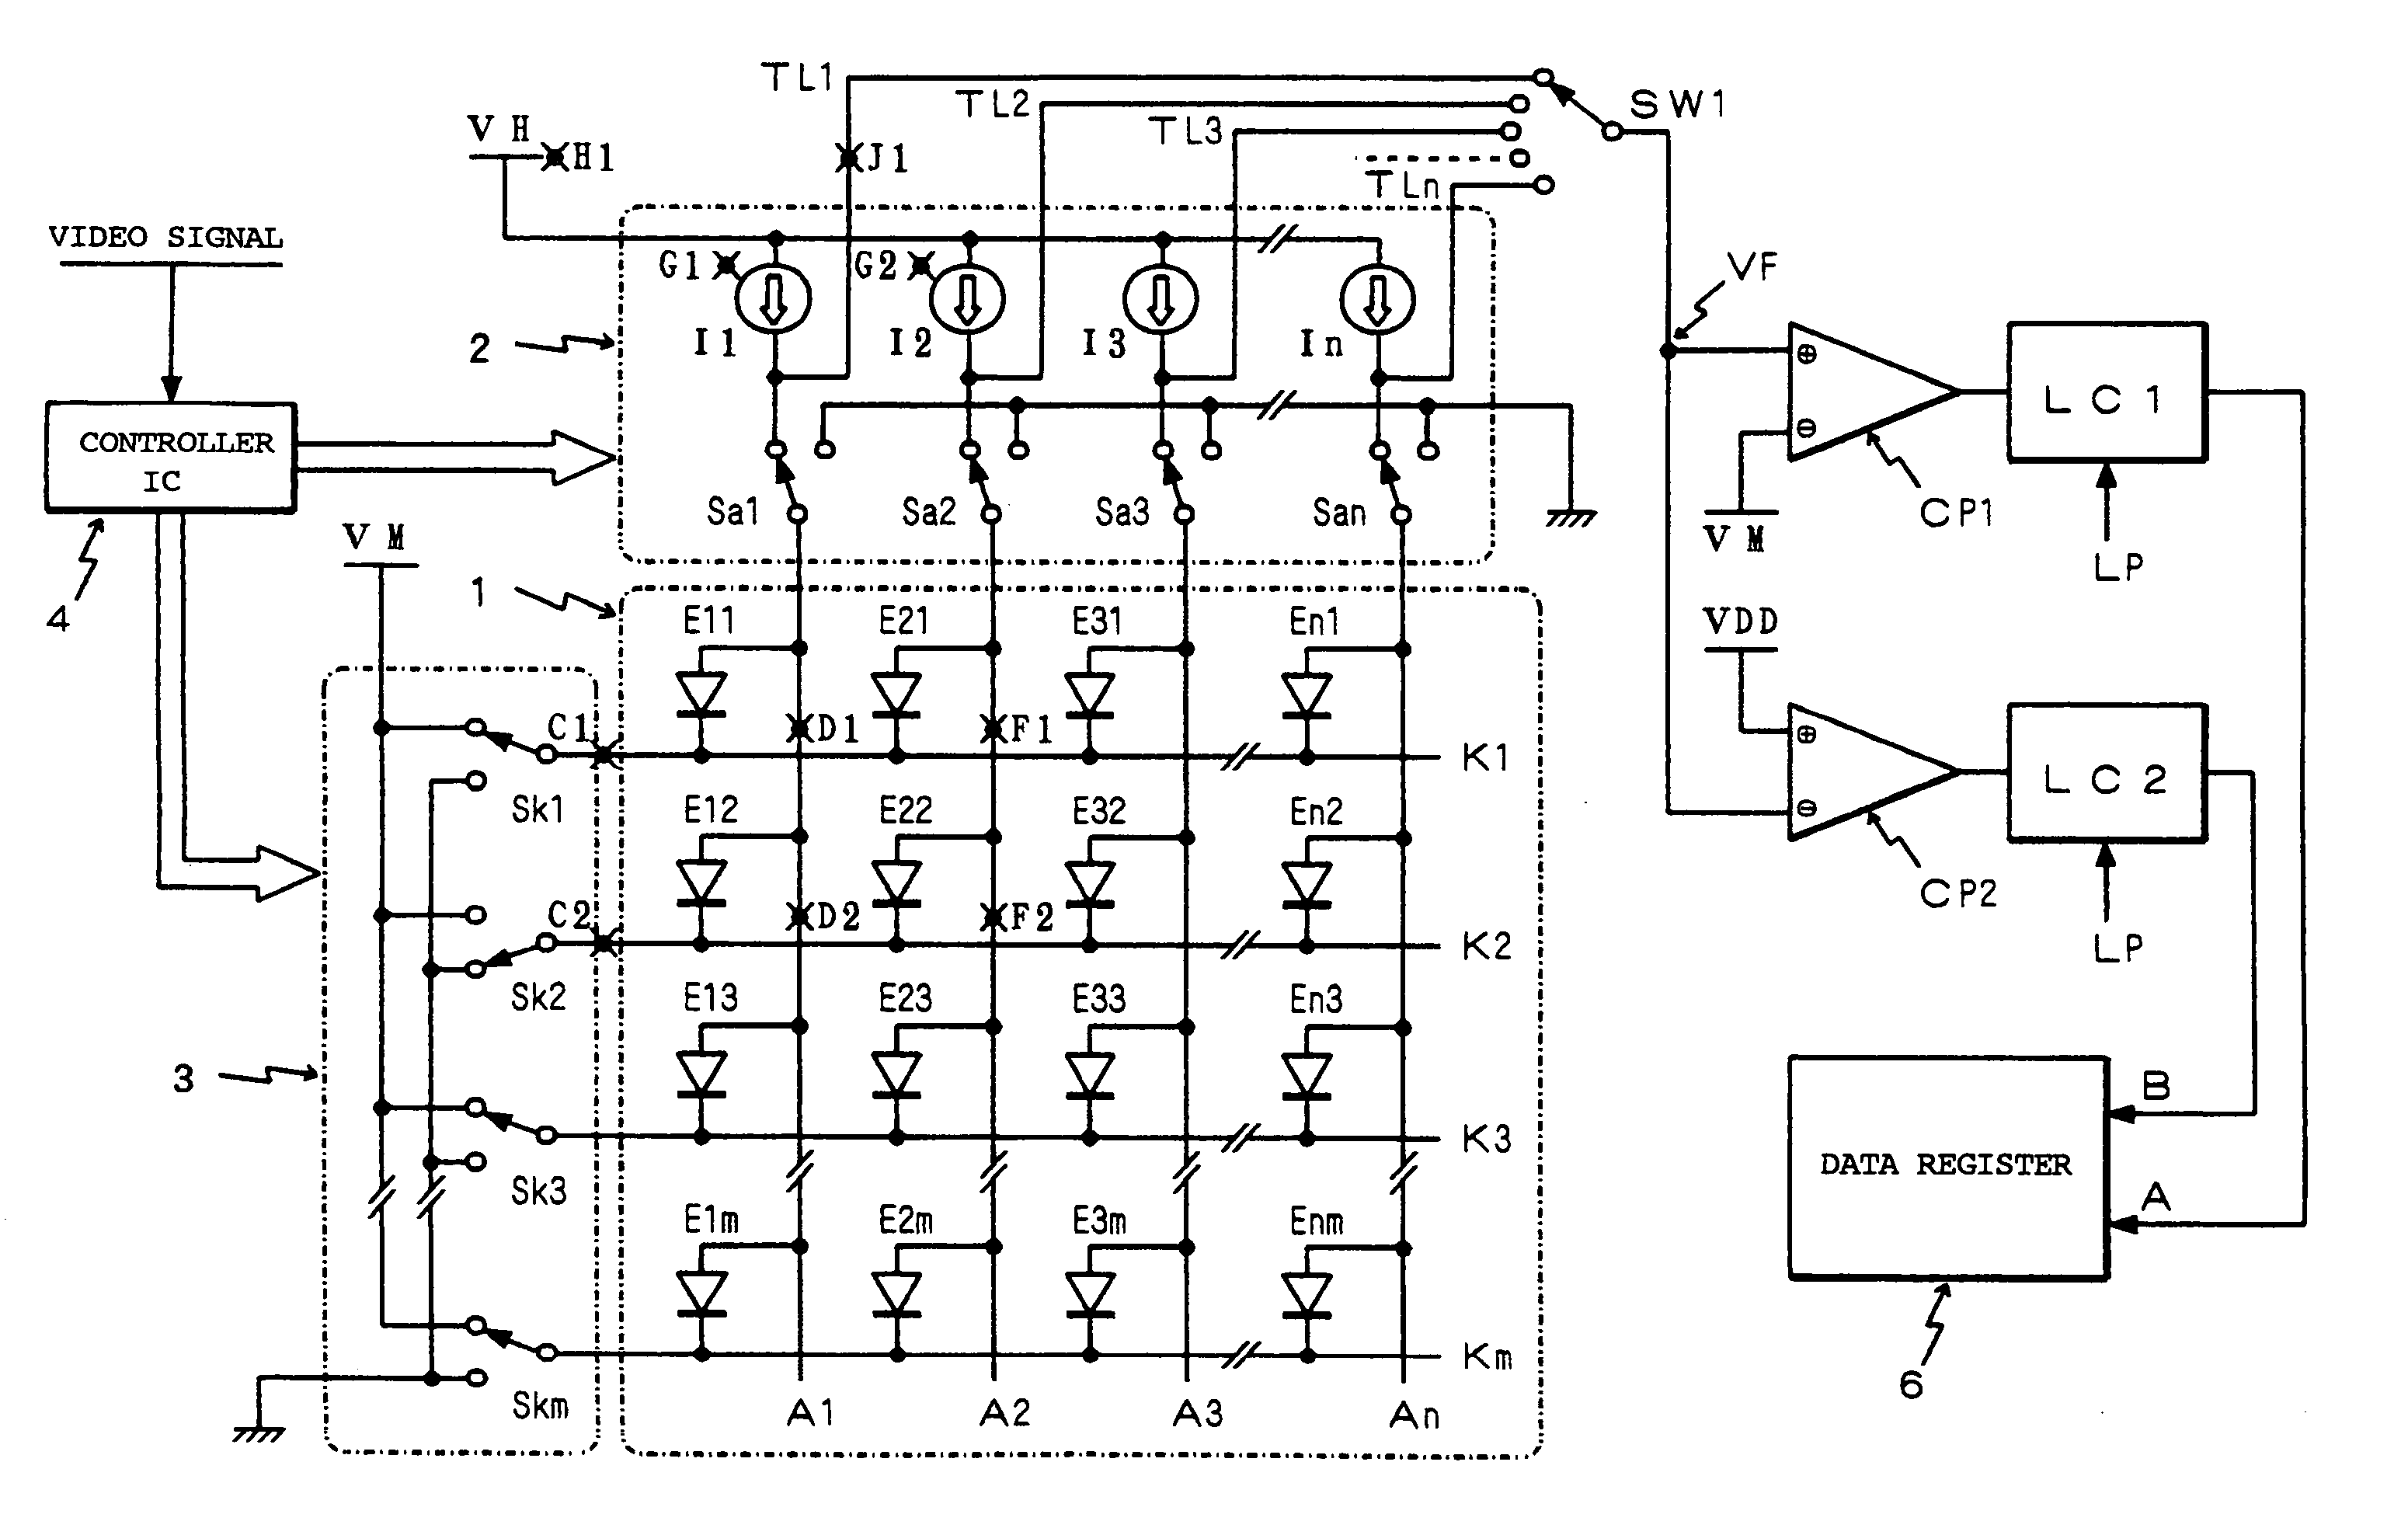 Self light emitting display module, electronic equipment into which the same module is loaded, and inspection method of a defect state in the same module